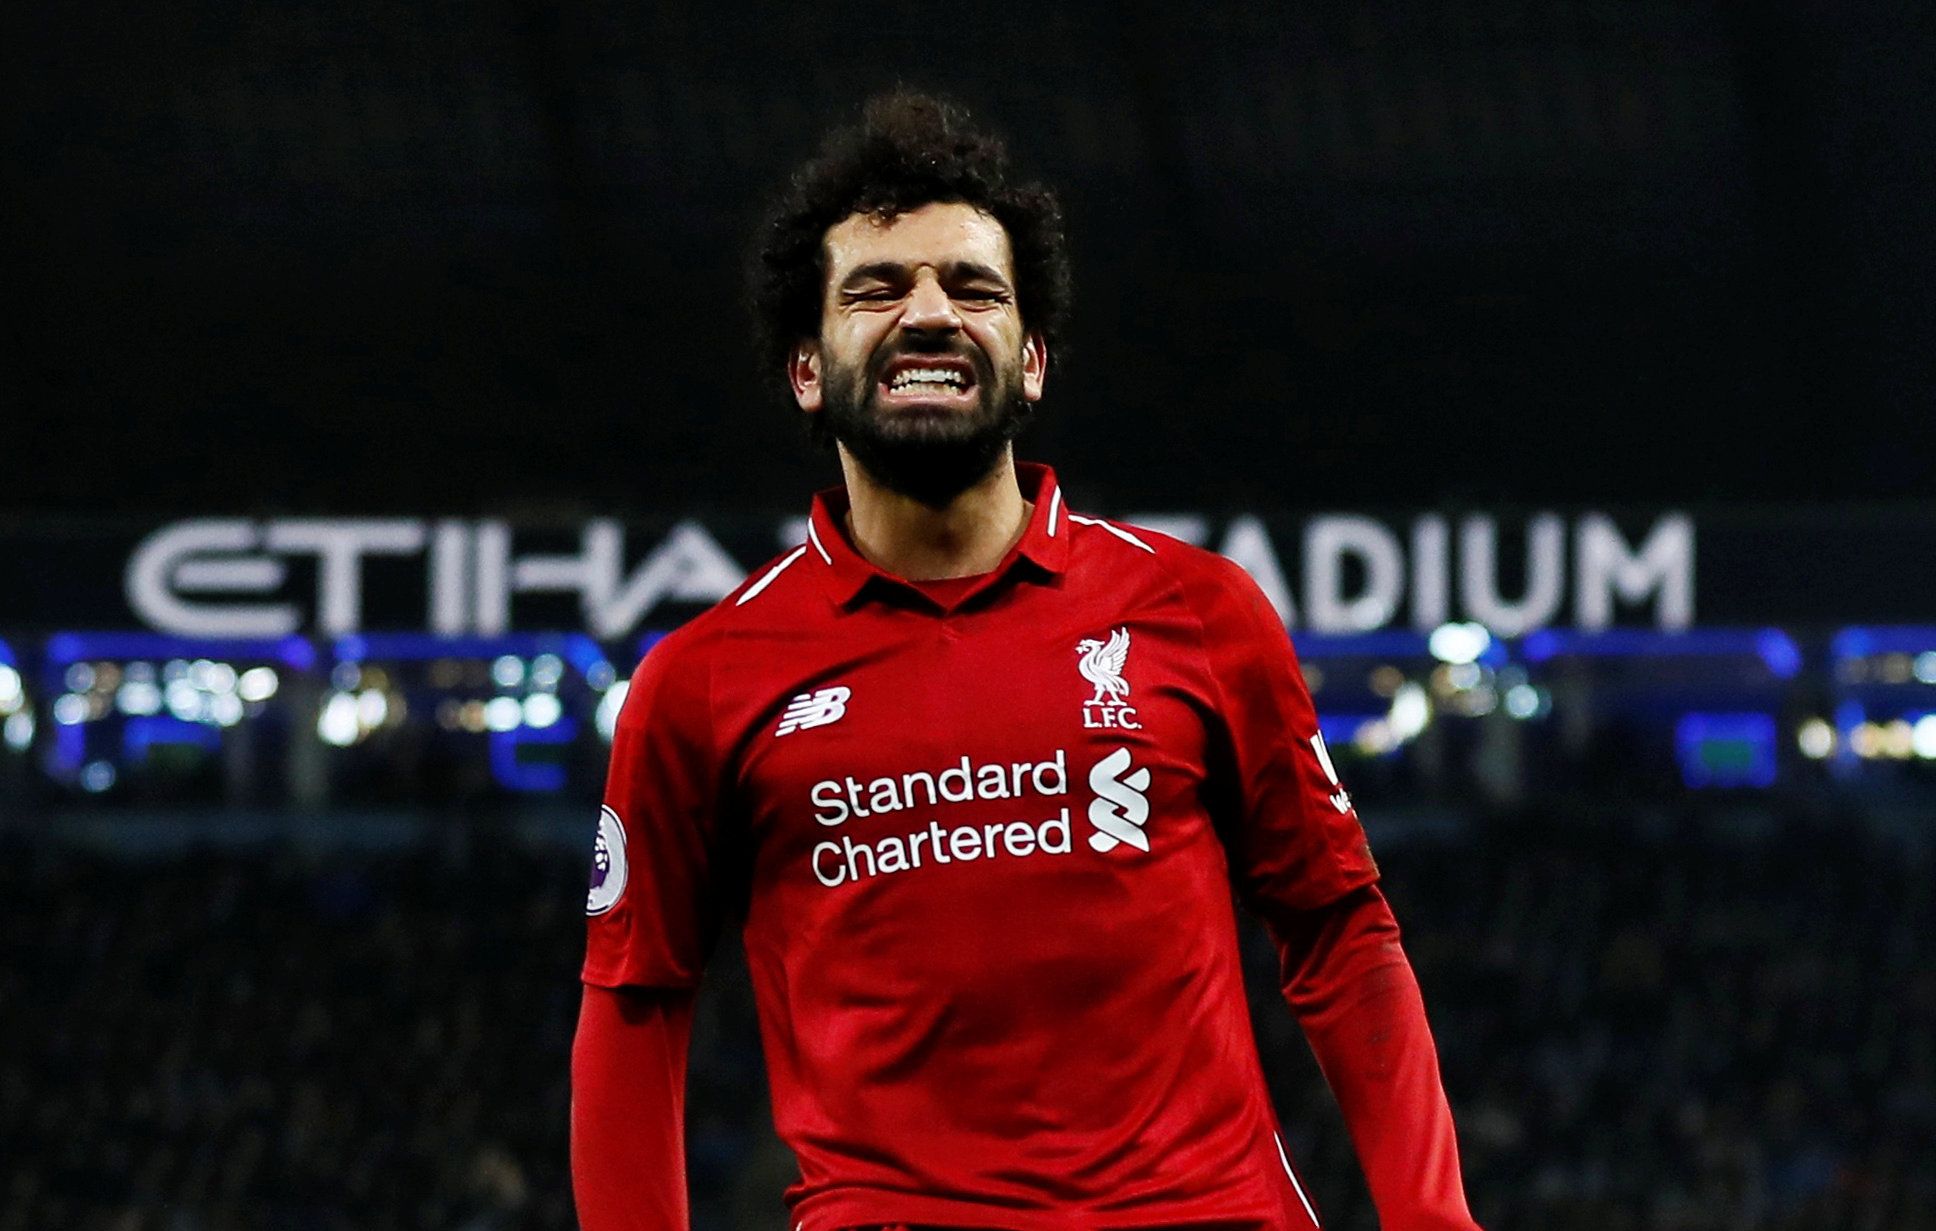 Soccer Football - Premier League - Manchester City v Liverpool - Etihad Stadium, Manchester, Britain - January 3, 2019  Liverpool's Mohamed Salah reacts  Action Images via Reuters/Jason Cairnduff  EDITORIAL USE ONLY. No use with unauthorized audio, video, data, fixture lists, club/league logos or 